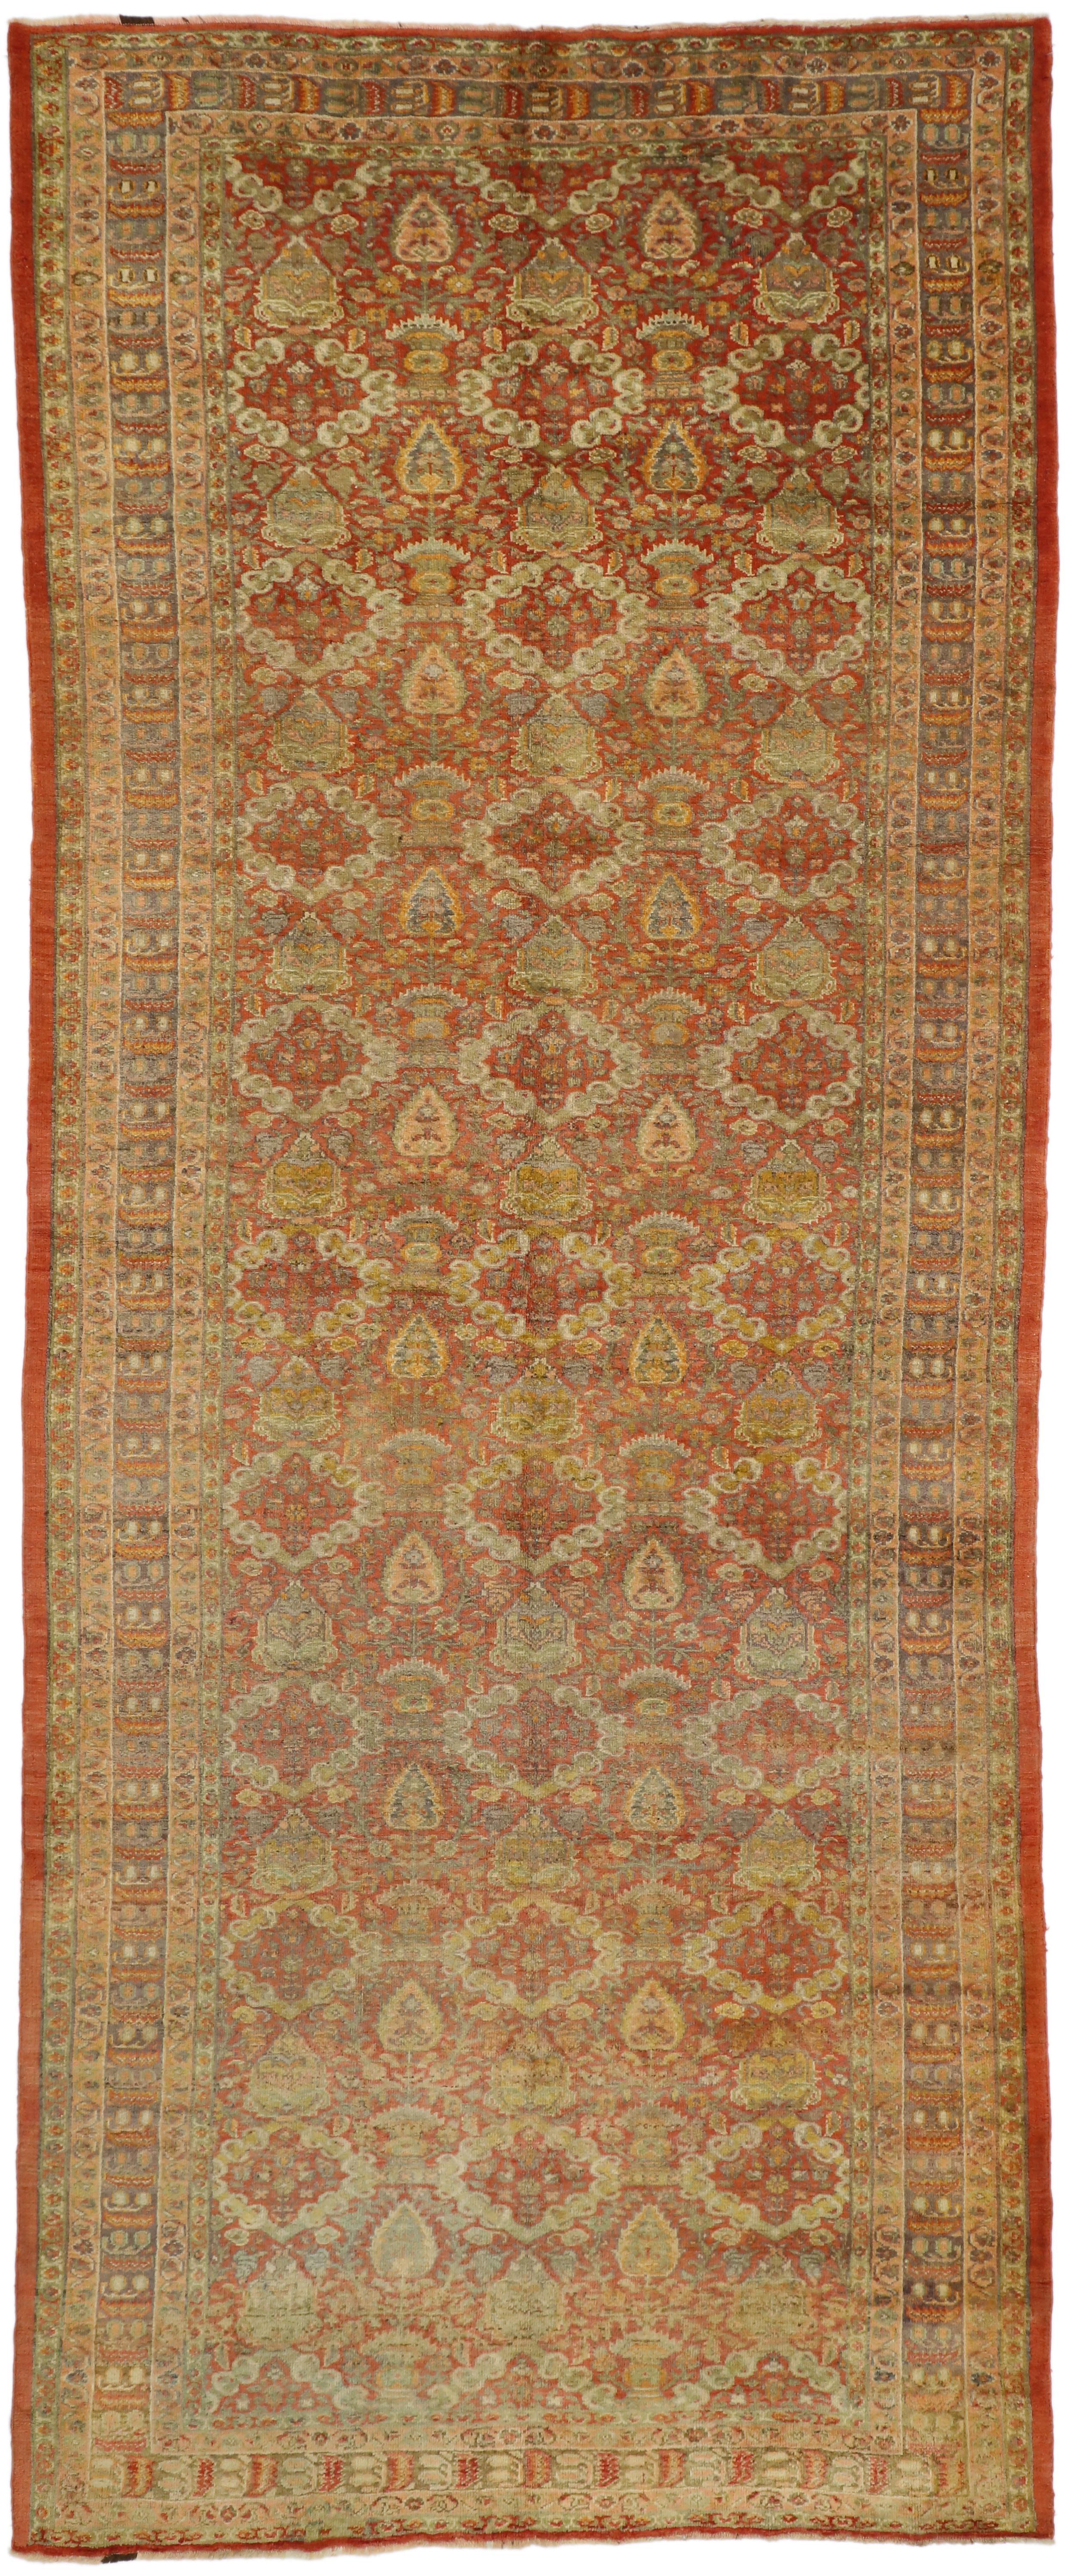 51018-51019 Pair of Antique Turkish Oushak Gallery Rugs, Matching Wide Hallway Runners. Enjoy a warm and historical feel to nearly any space with this pair of antique Turkish Oushak runners. Each antique Oushak runner features an all-over geometric